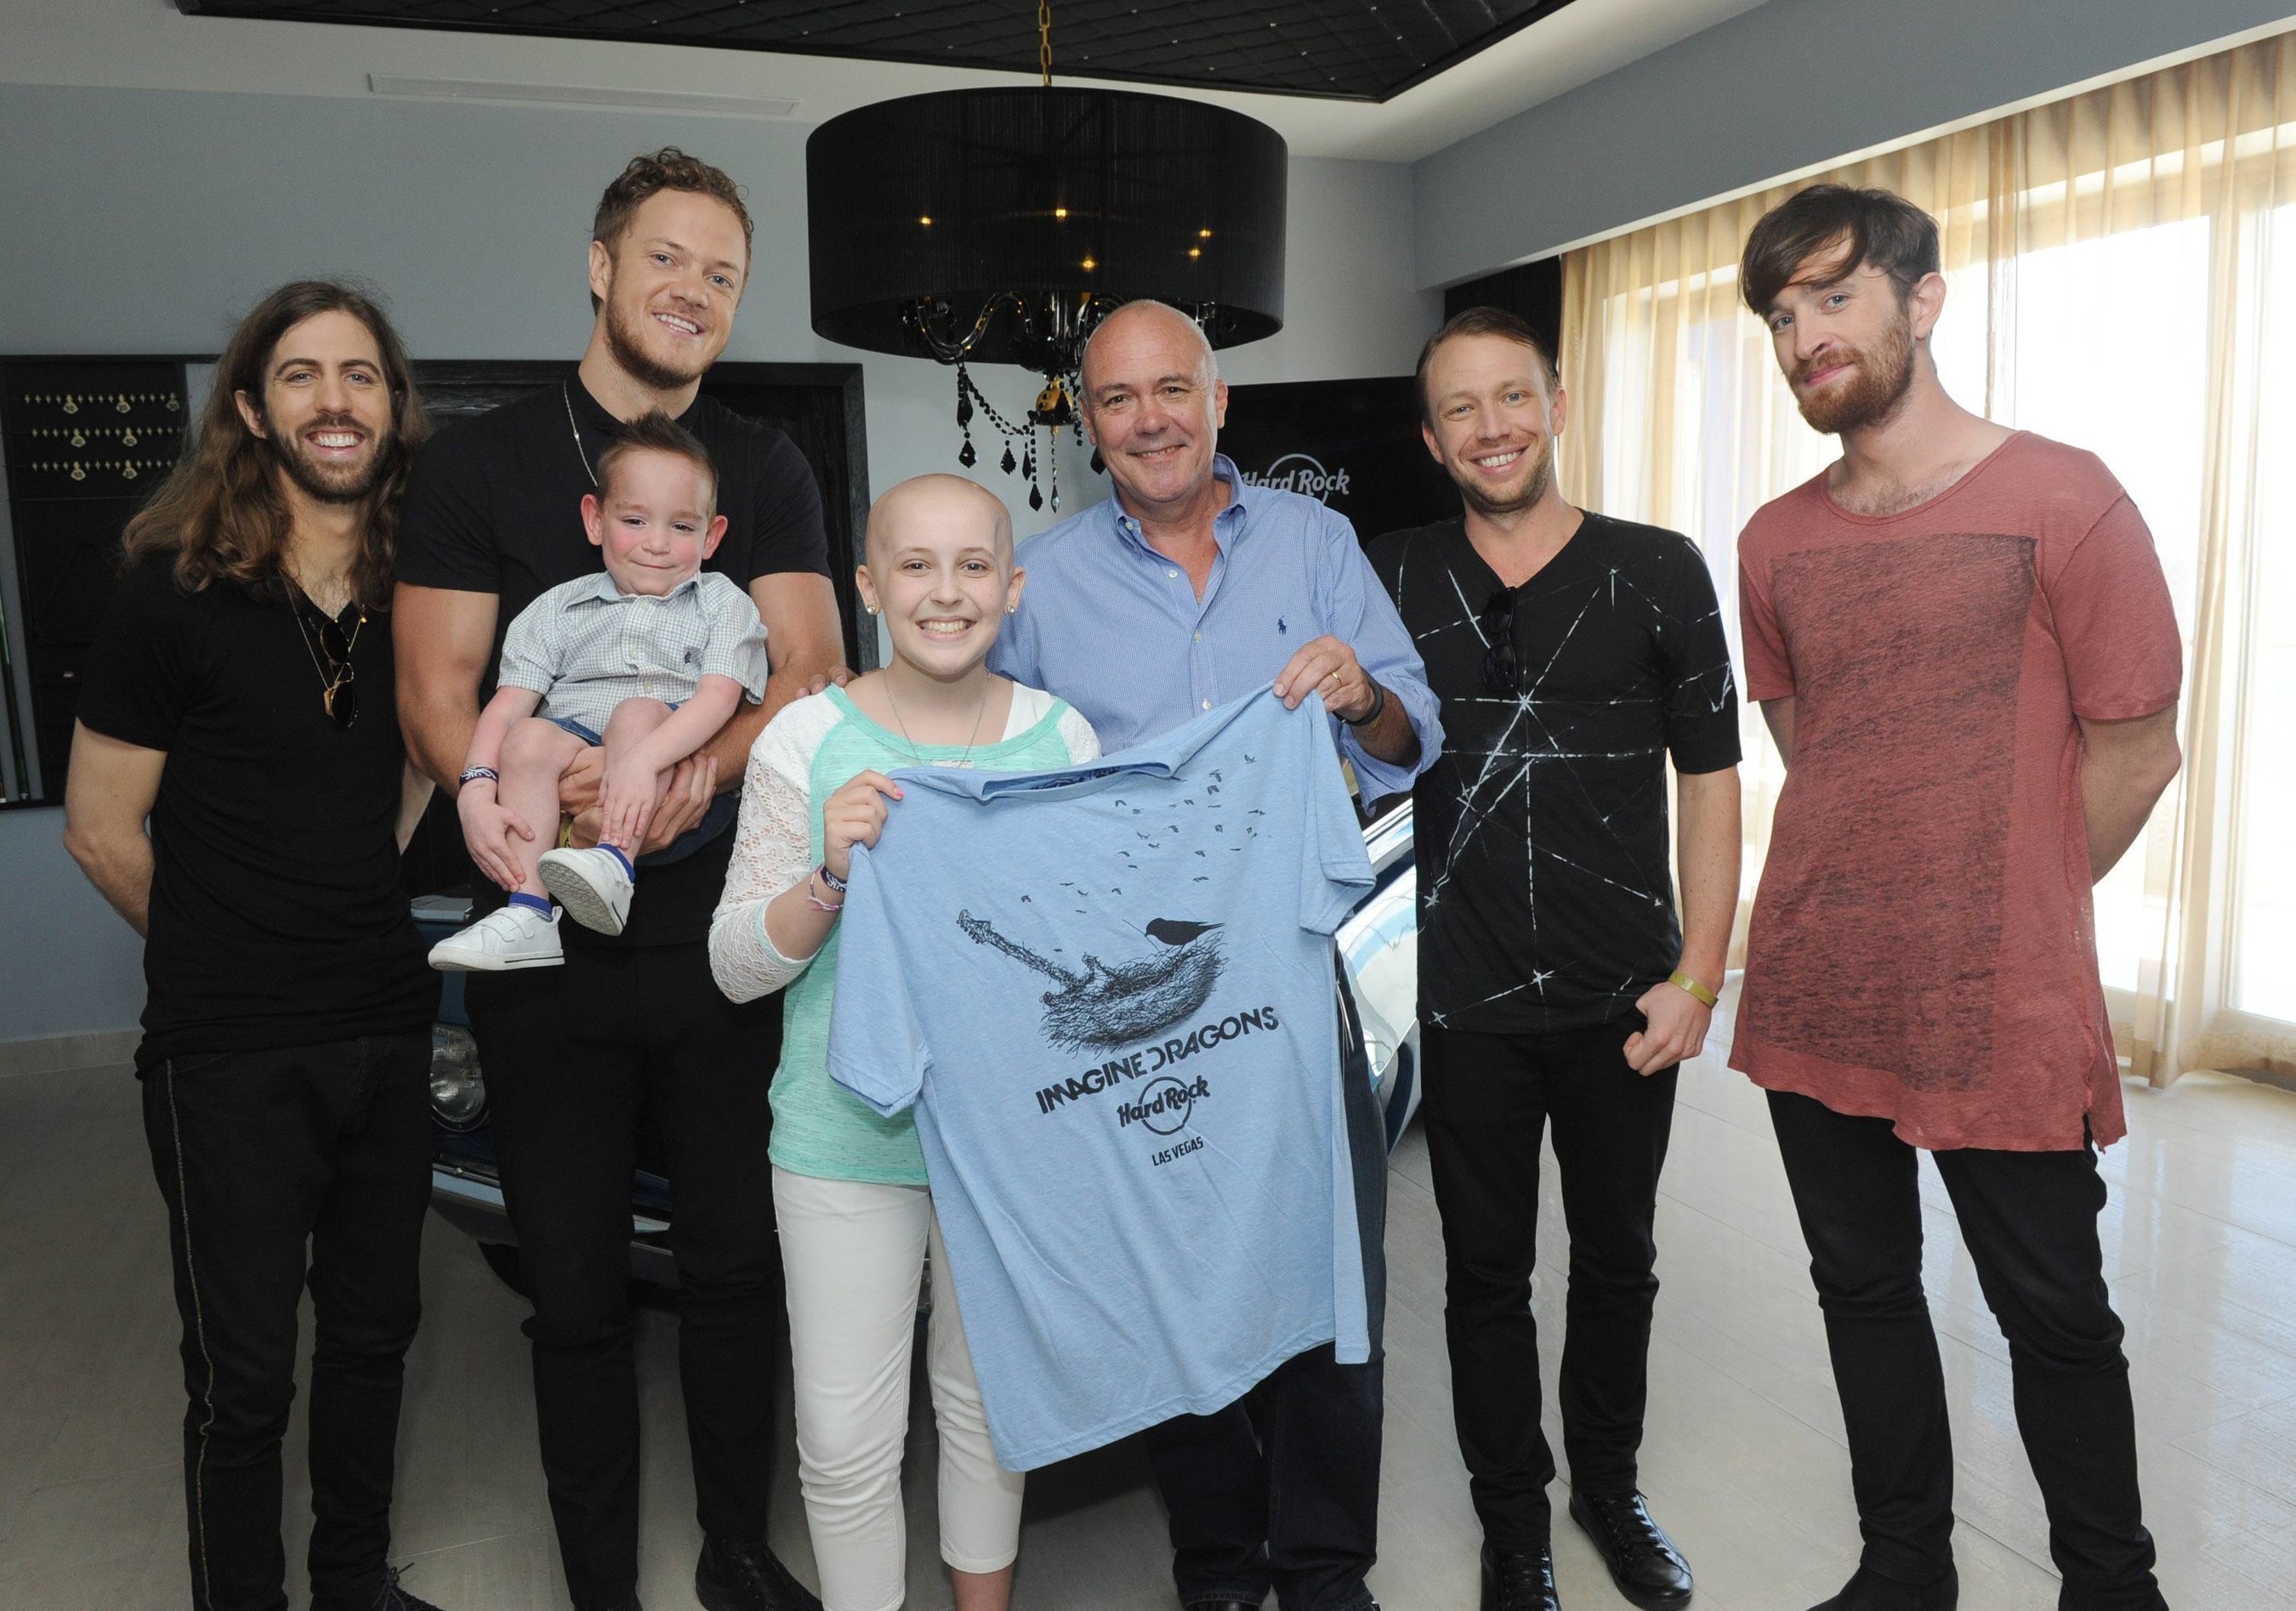 Hamish Dodds, center, President and CEO of Hard Rock International, and Wayne Sermon, Dan Reynolds, Ben McKee and Daniel Platzman, left to right, of Imagine Dragons, meet with Christian Smith, 4, of Dewey, Okla., and Kate Pierson, 13, of West Jordan, Utah, who have benefitted from the Tyler Robinson Foundation, at Hard Rock Hotel Riviera Maya in Mexico, Tuesday, Jan. 20, 2015, as part of the launch of Hard Rock's Imagine Dragons Signature Series T-shirt and pin. A portion of the retail price from sales of the merchandise will benefit the foundation supporting families affected by pediatric cancer. (Photo by Diane Bondareff/Invision for Hard Rock International/AP Images)